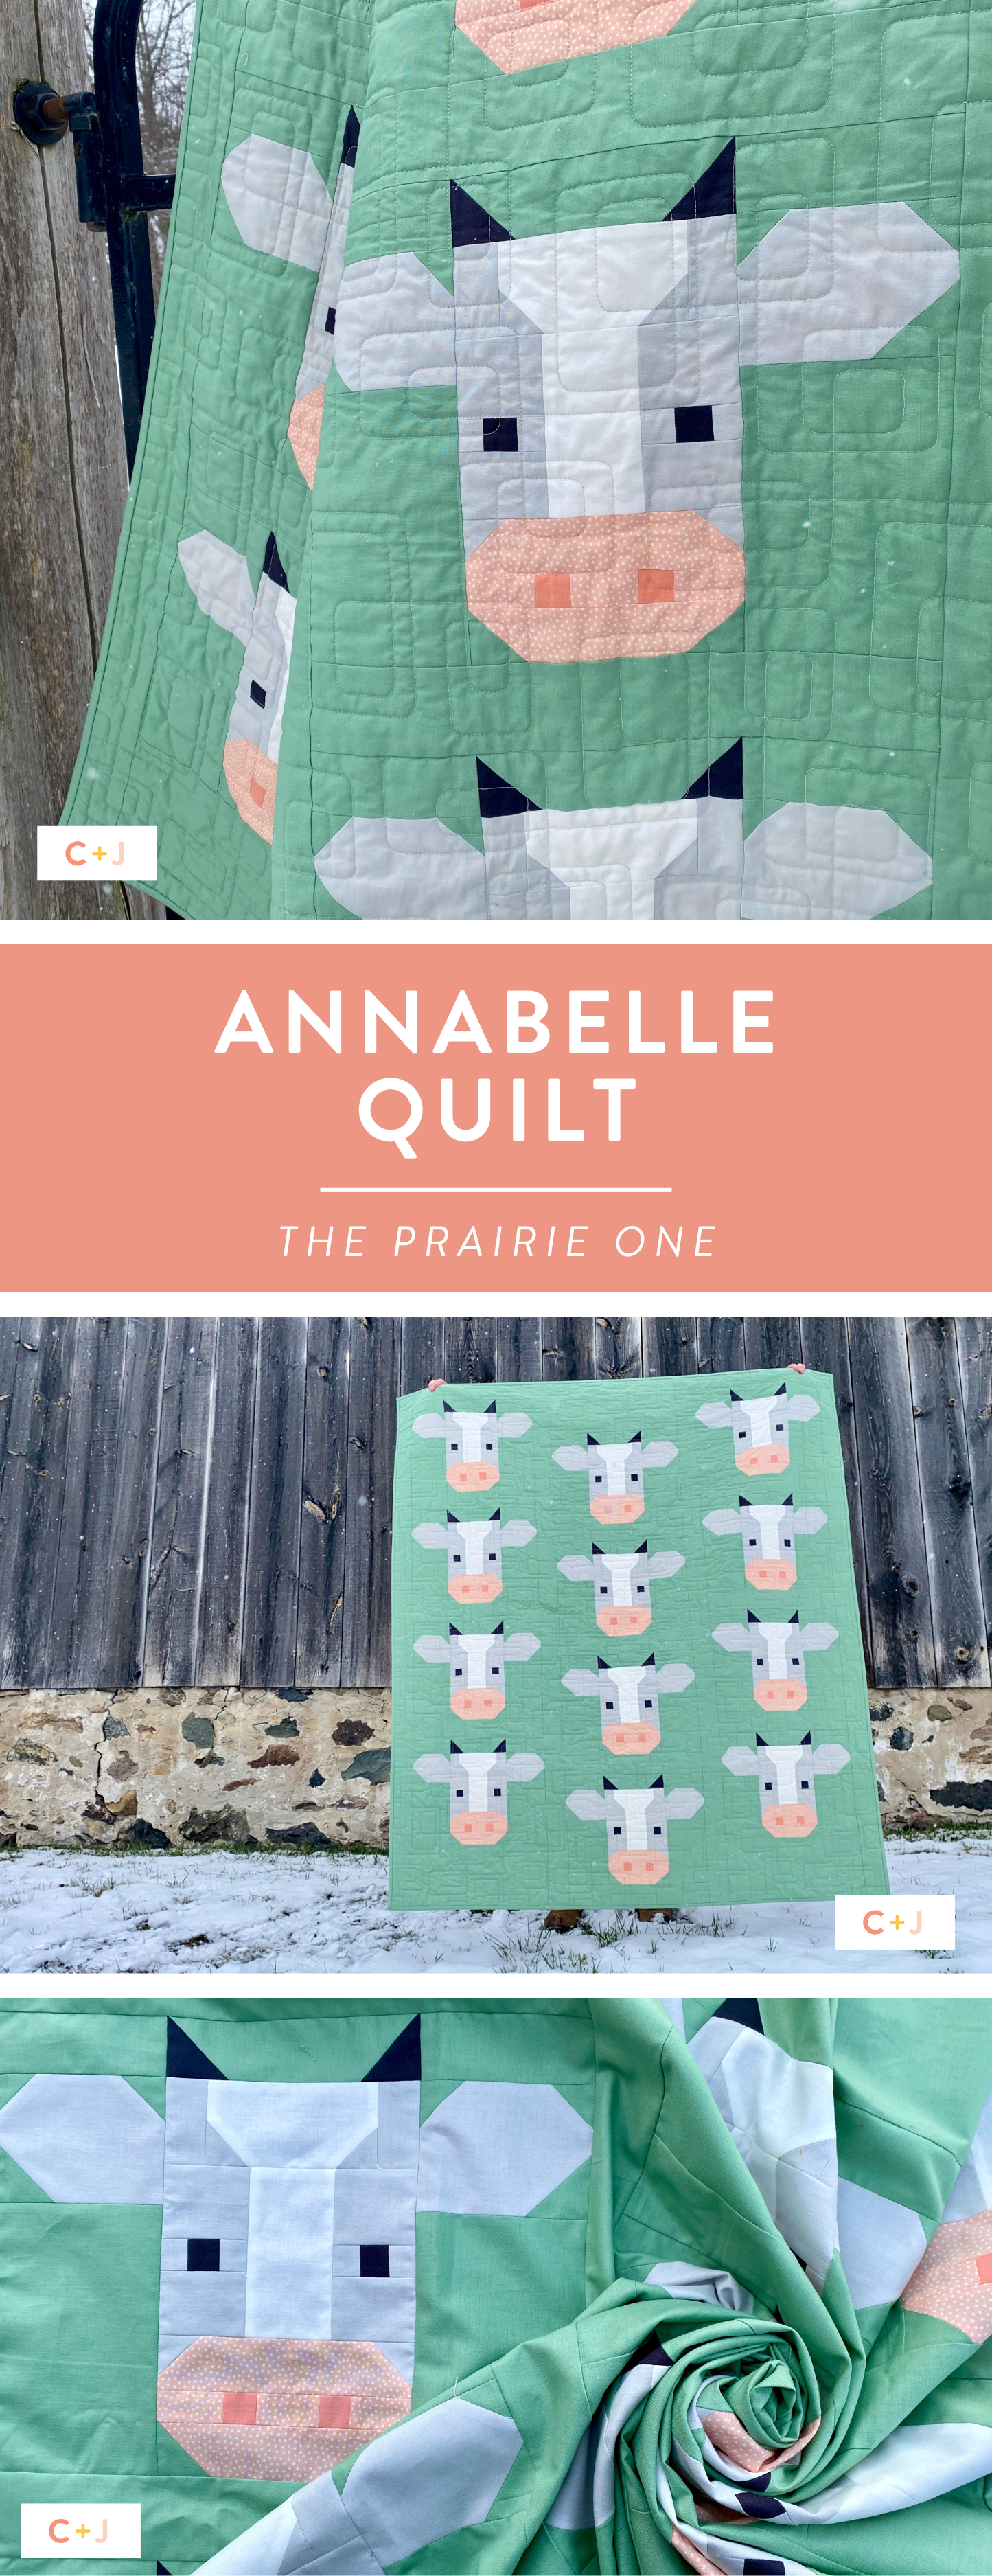 Annabelle Quilt - A fun and modern cow-inspired quilt pattern